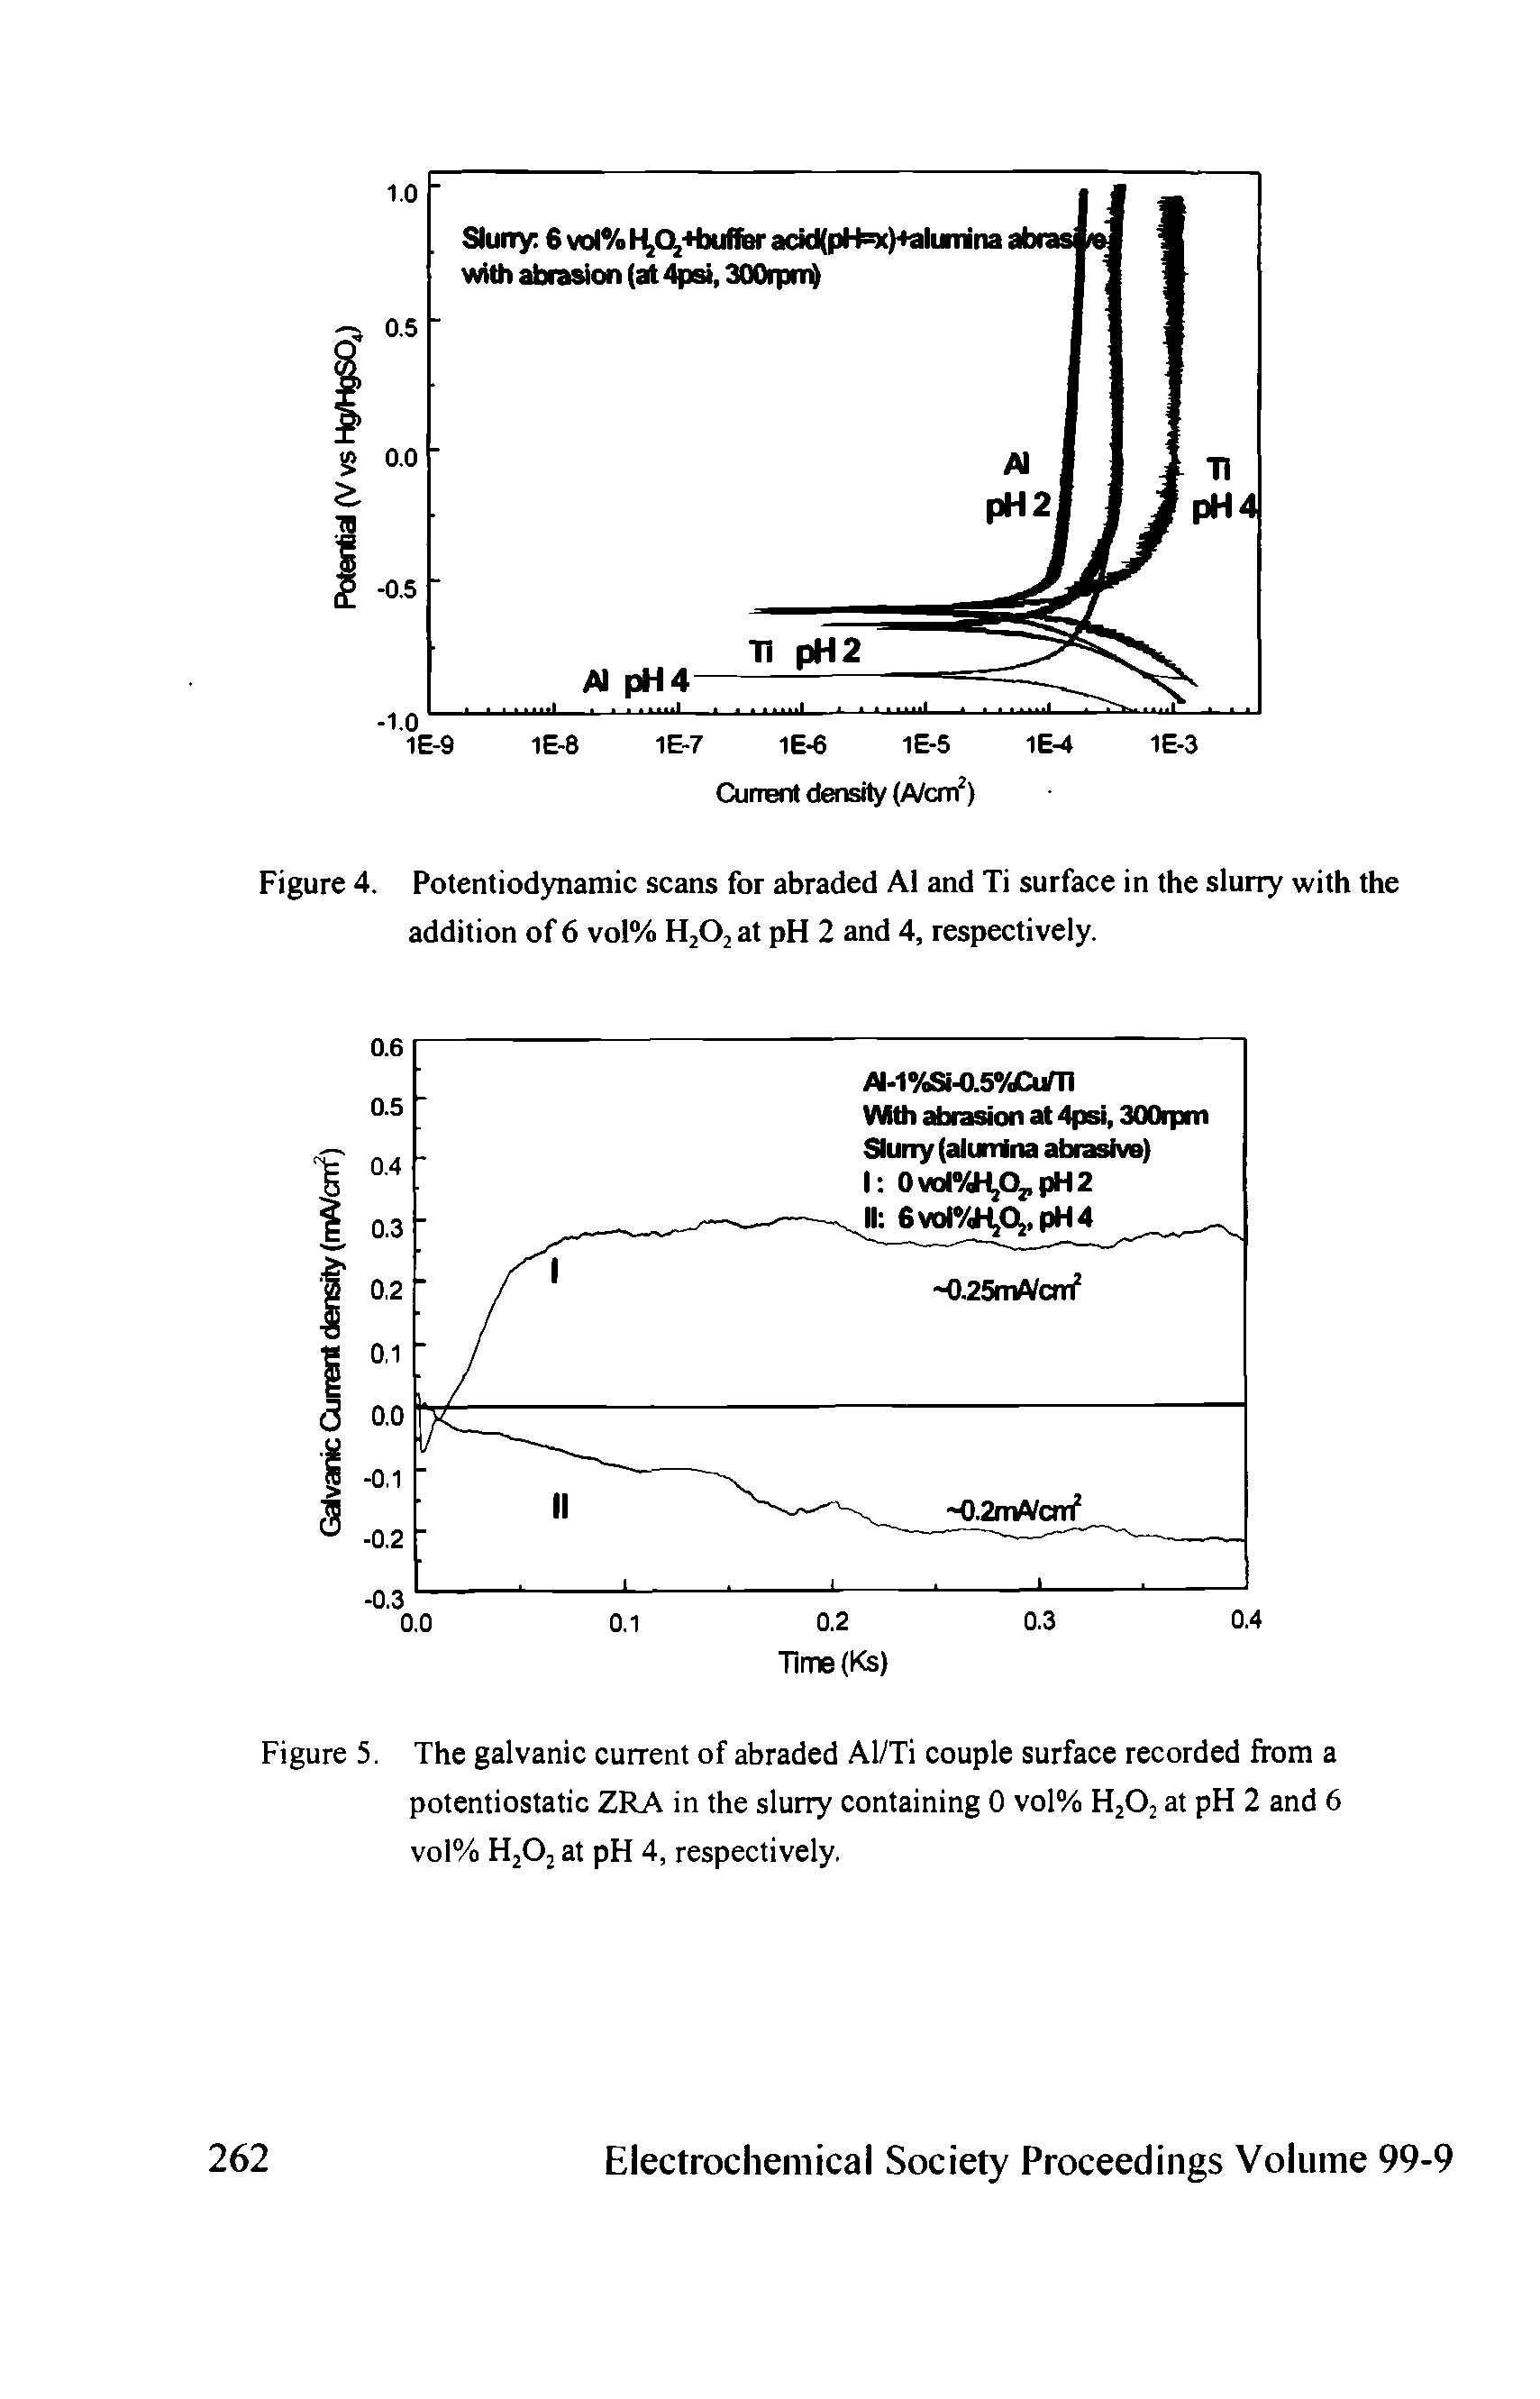 Figure 4. Potentiodynamic scans for abraded A1 and Ti surface in the slurry with the addition of 6 vol% H202 at pH 2 and 4, respectively.